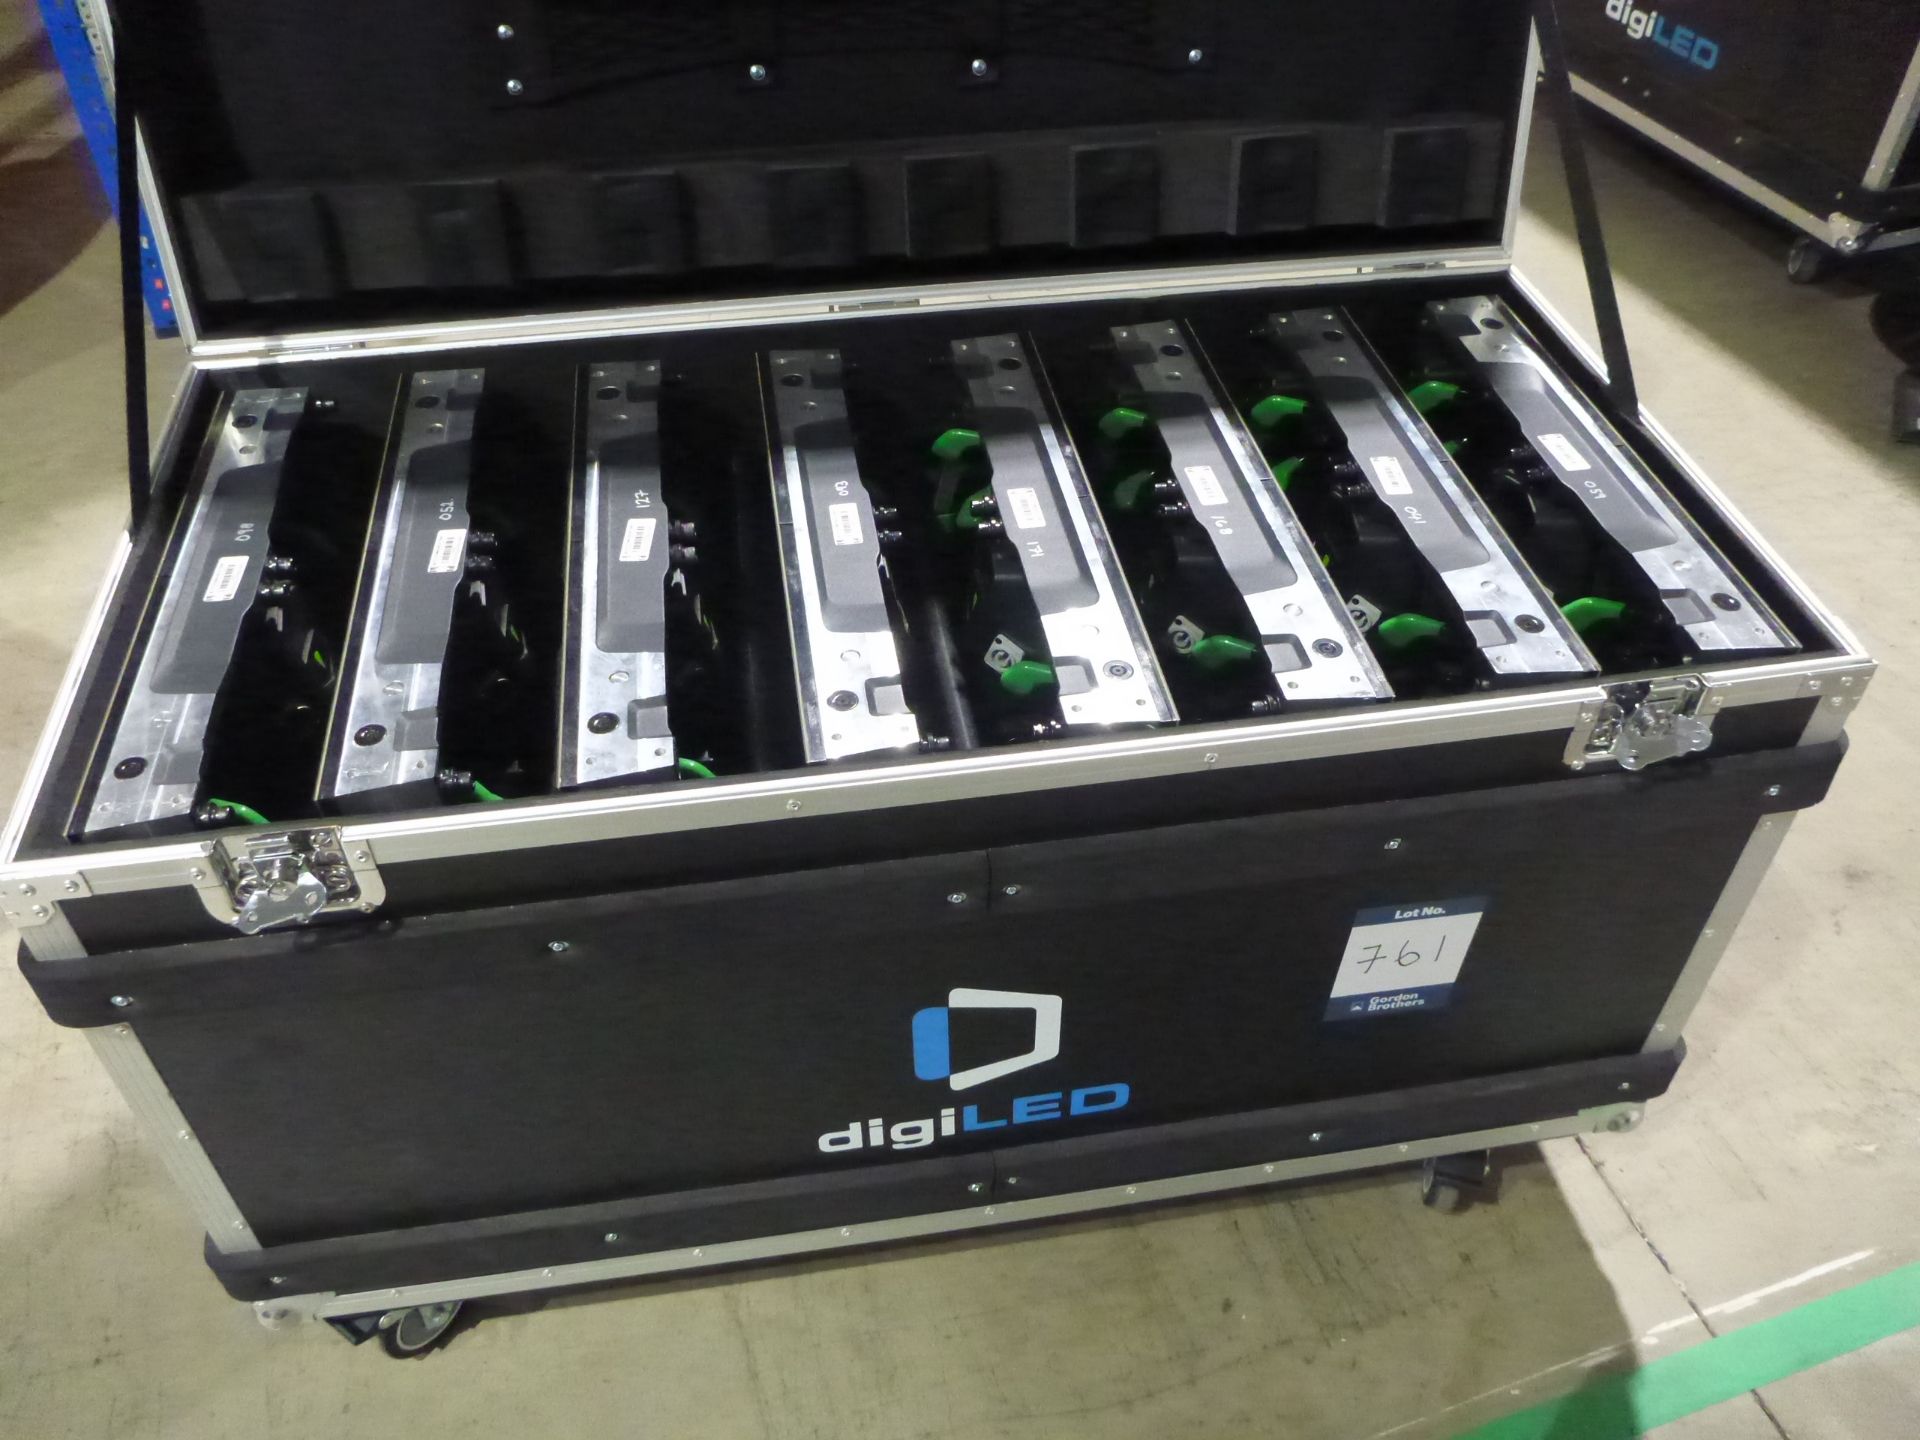 DigiLED x-Tek 2600 LED Modules (Green) Qty 8 off in flight case. Note tiles only no cables (Please